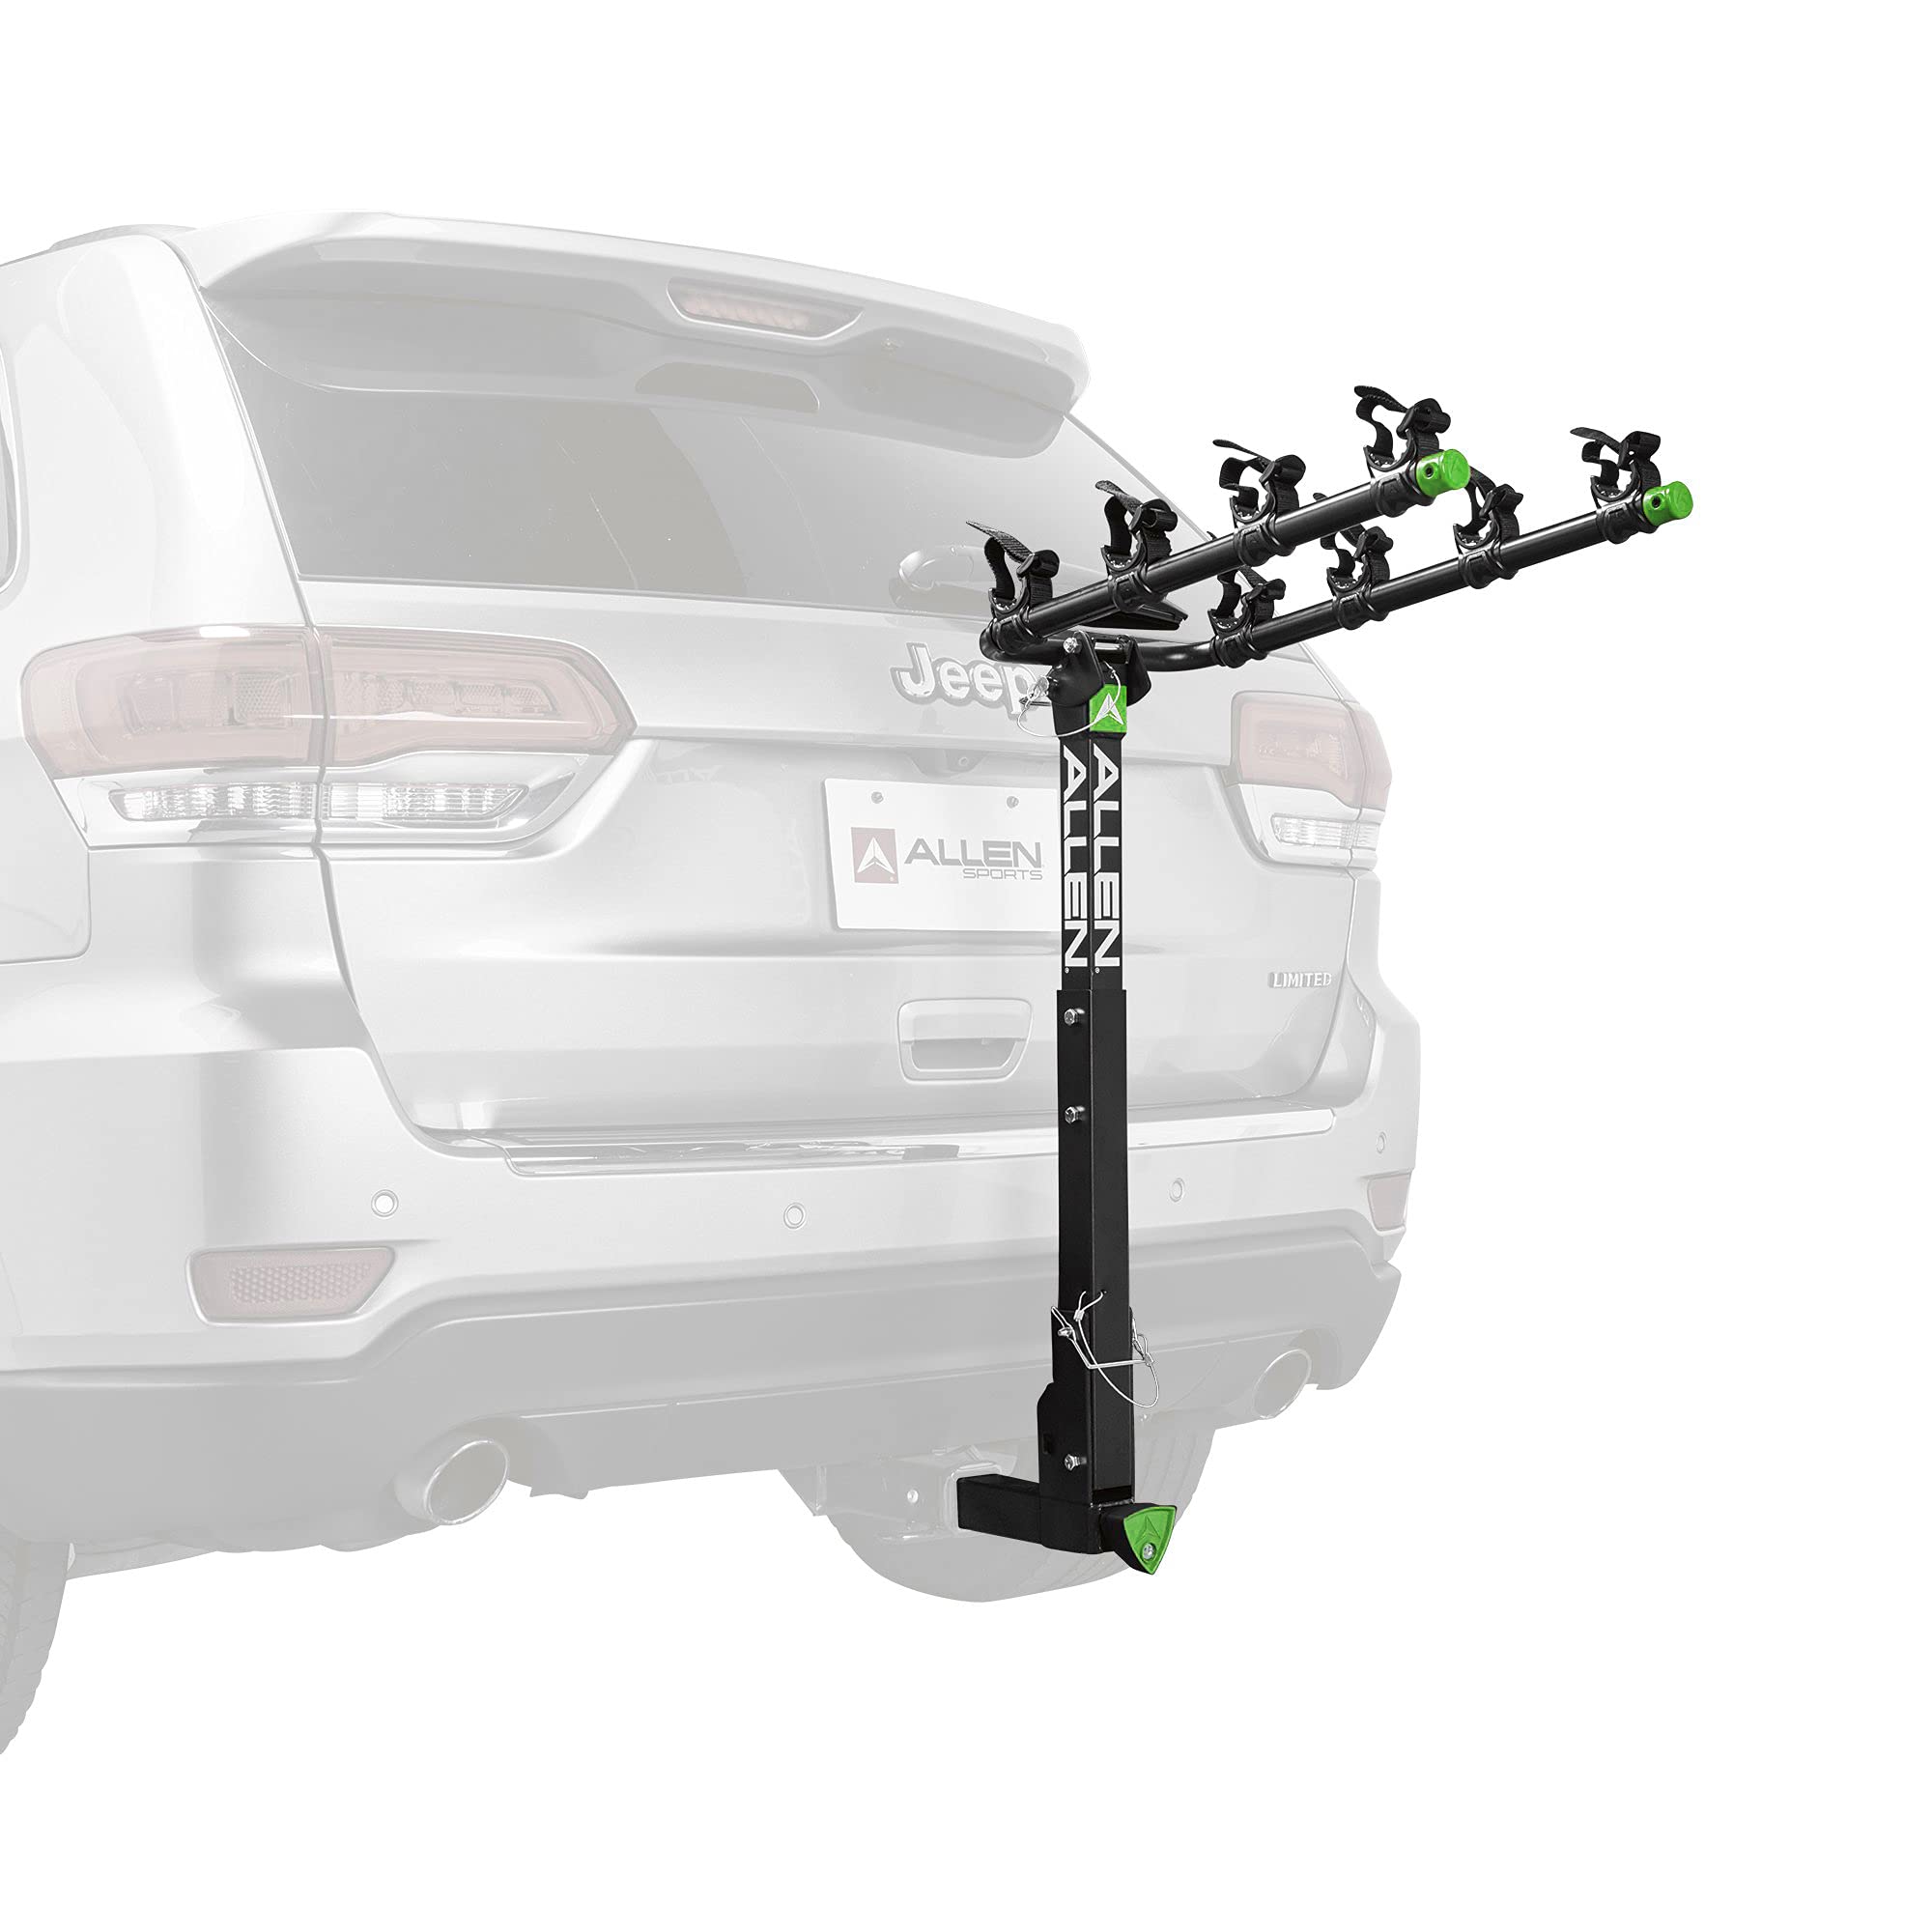 Allen Sports Deluxe Locking Quick Release 4-Bike Carrier for 2"Hitch (Green/Black) $43.37 + Free Shipping